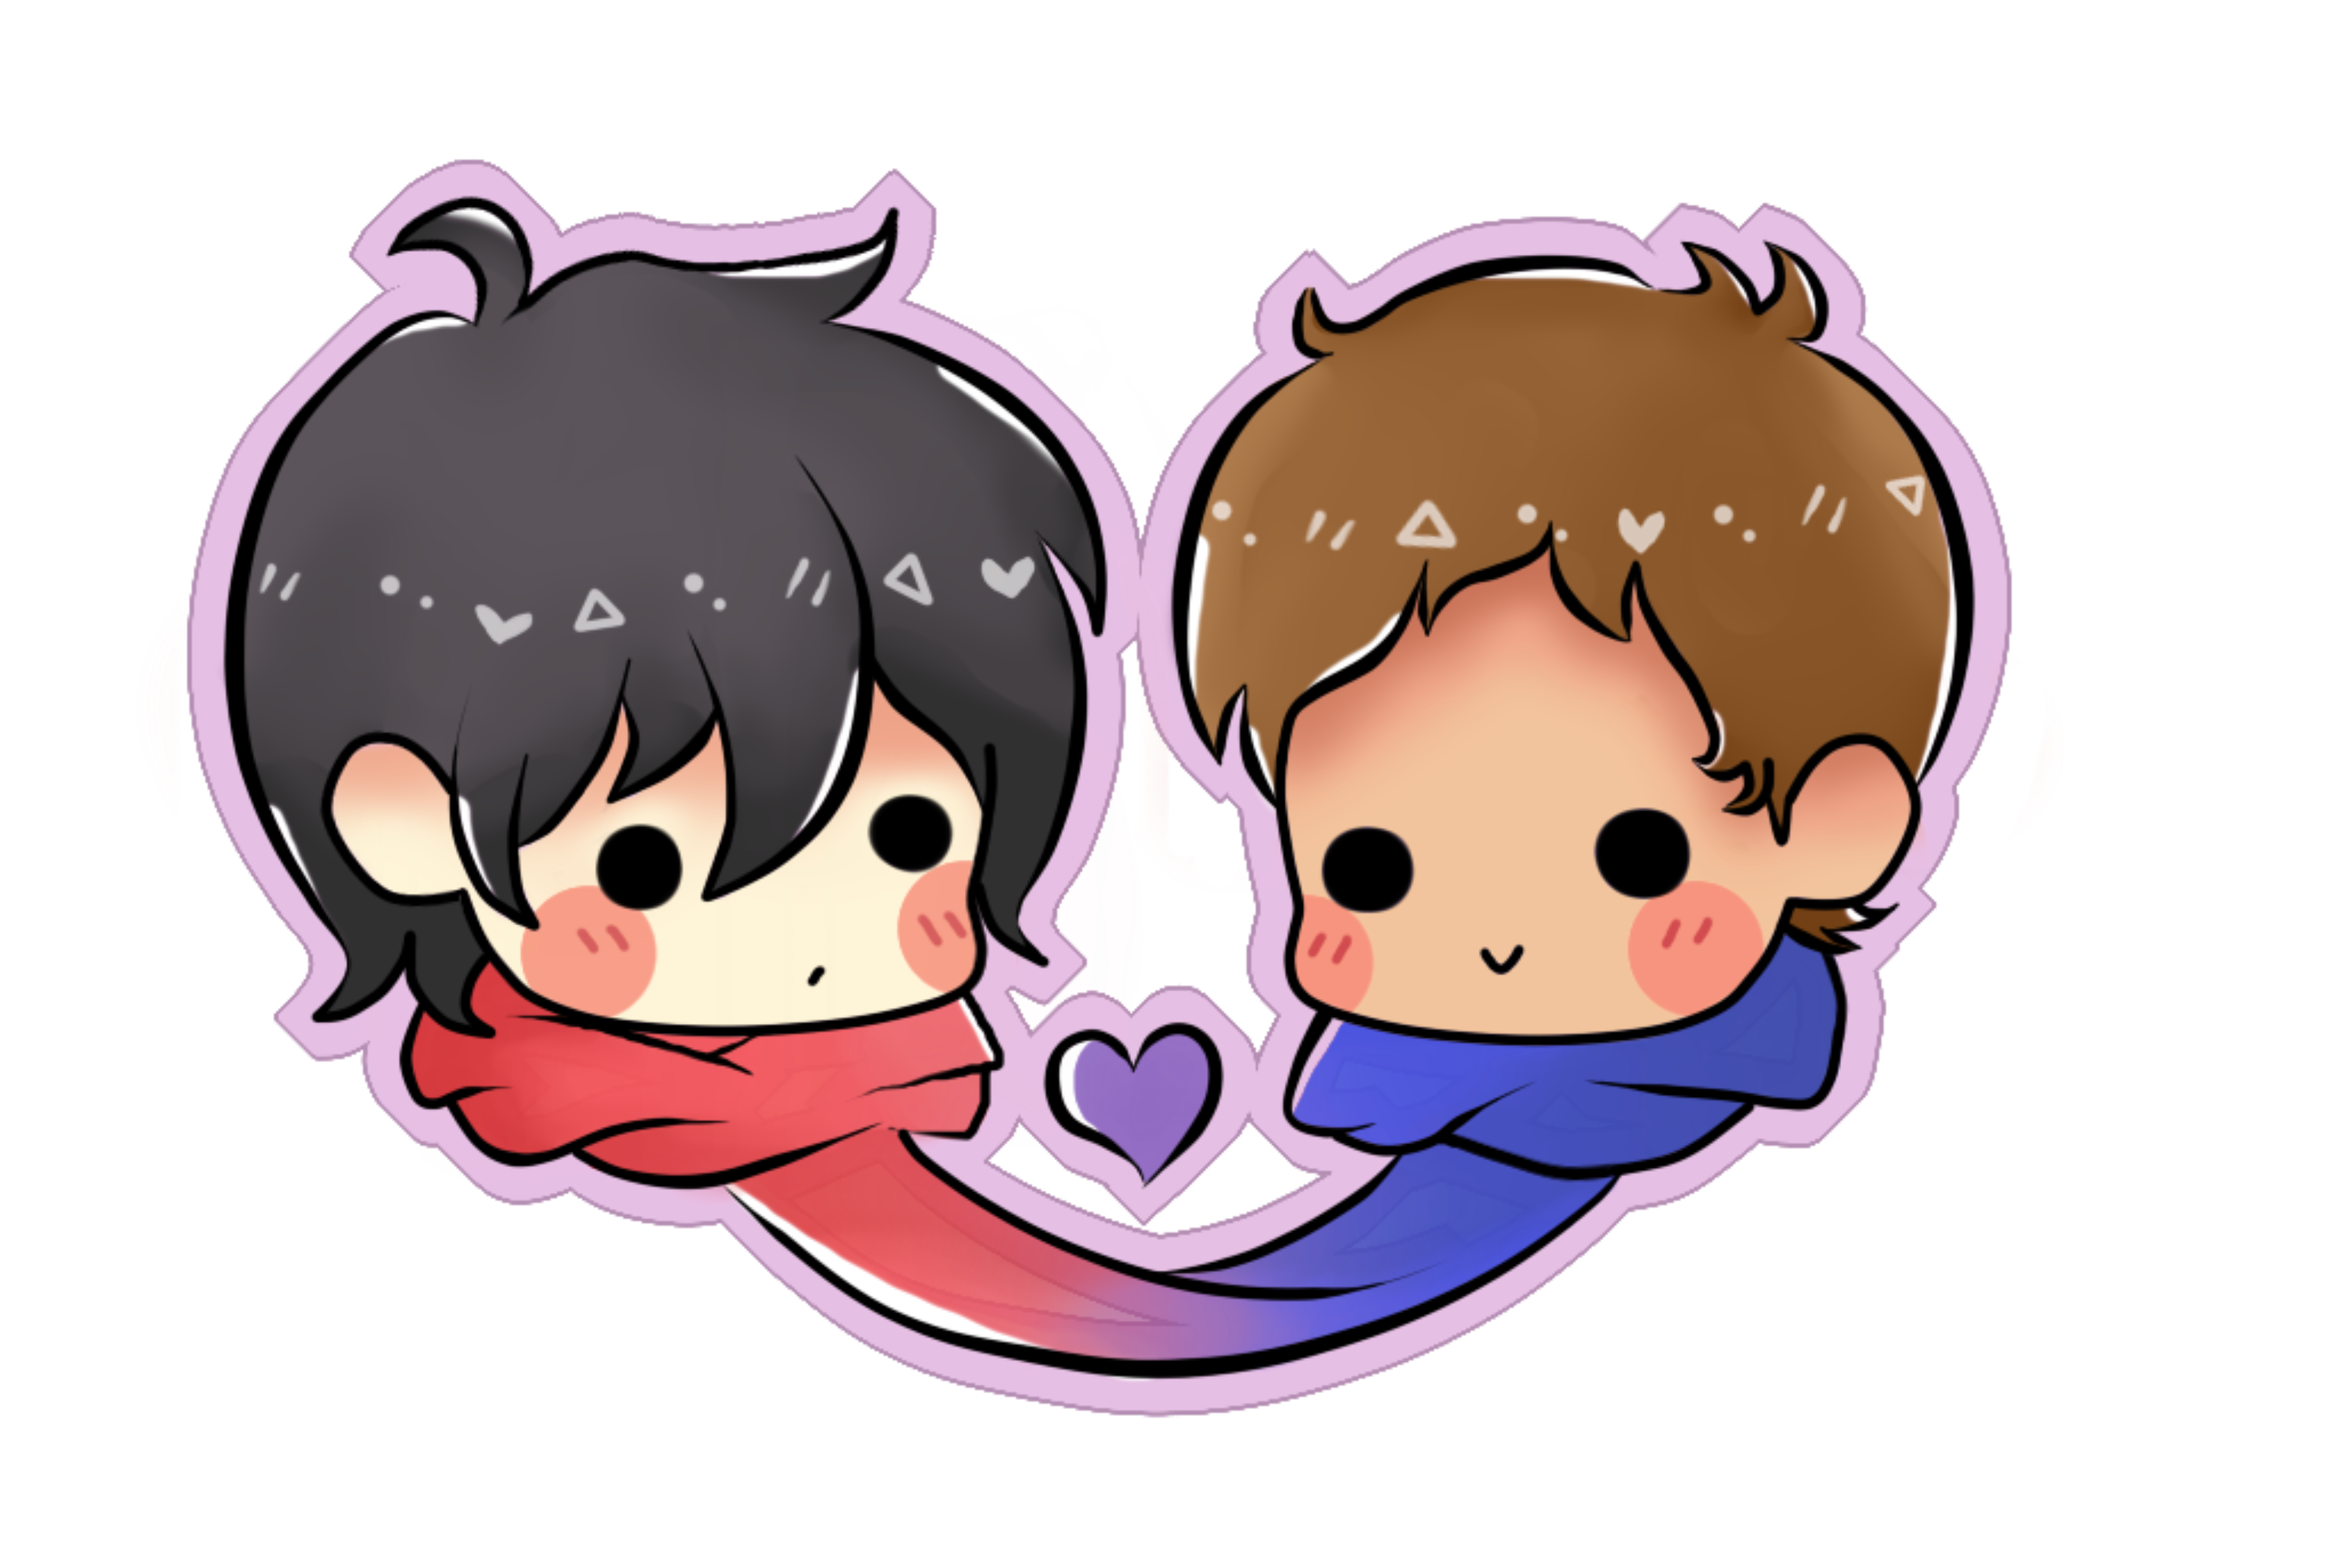 voltron_klance_scarf_by_drowsydave-db7paas.png